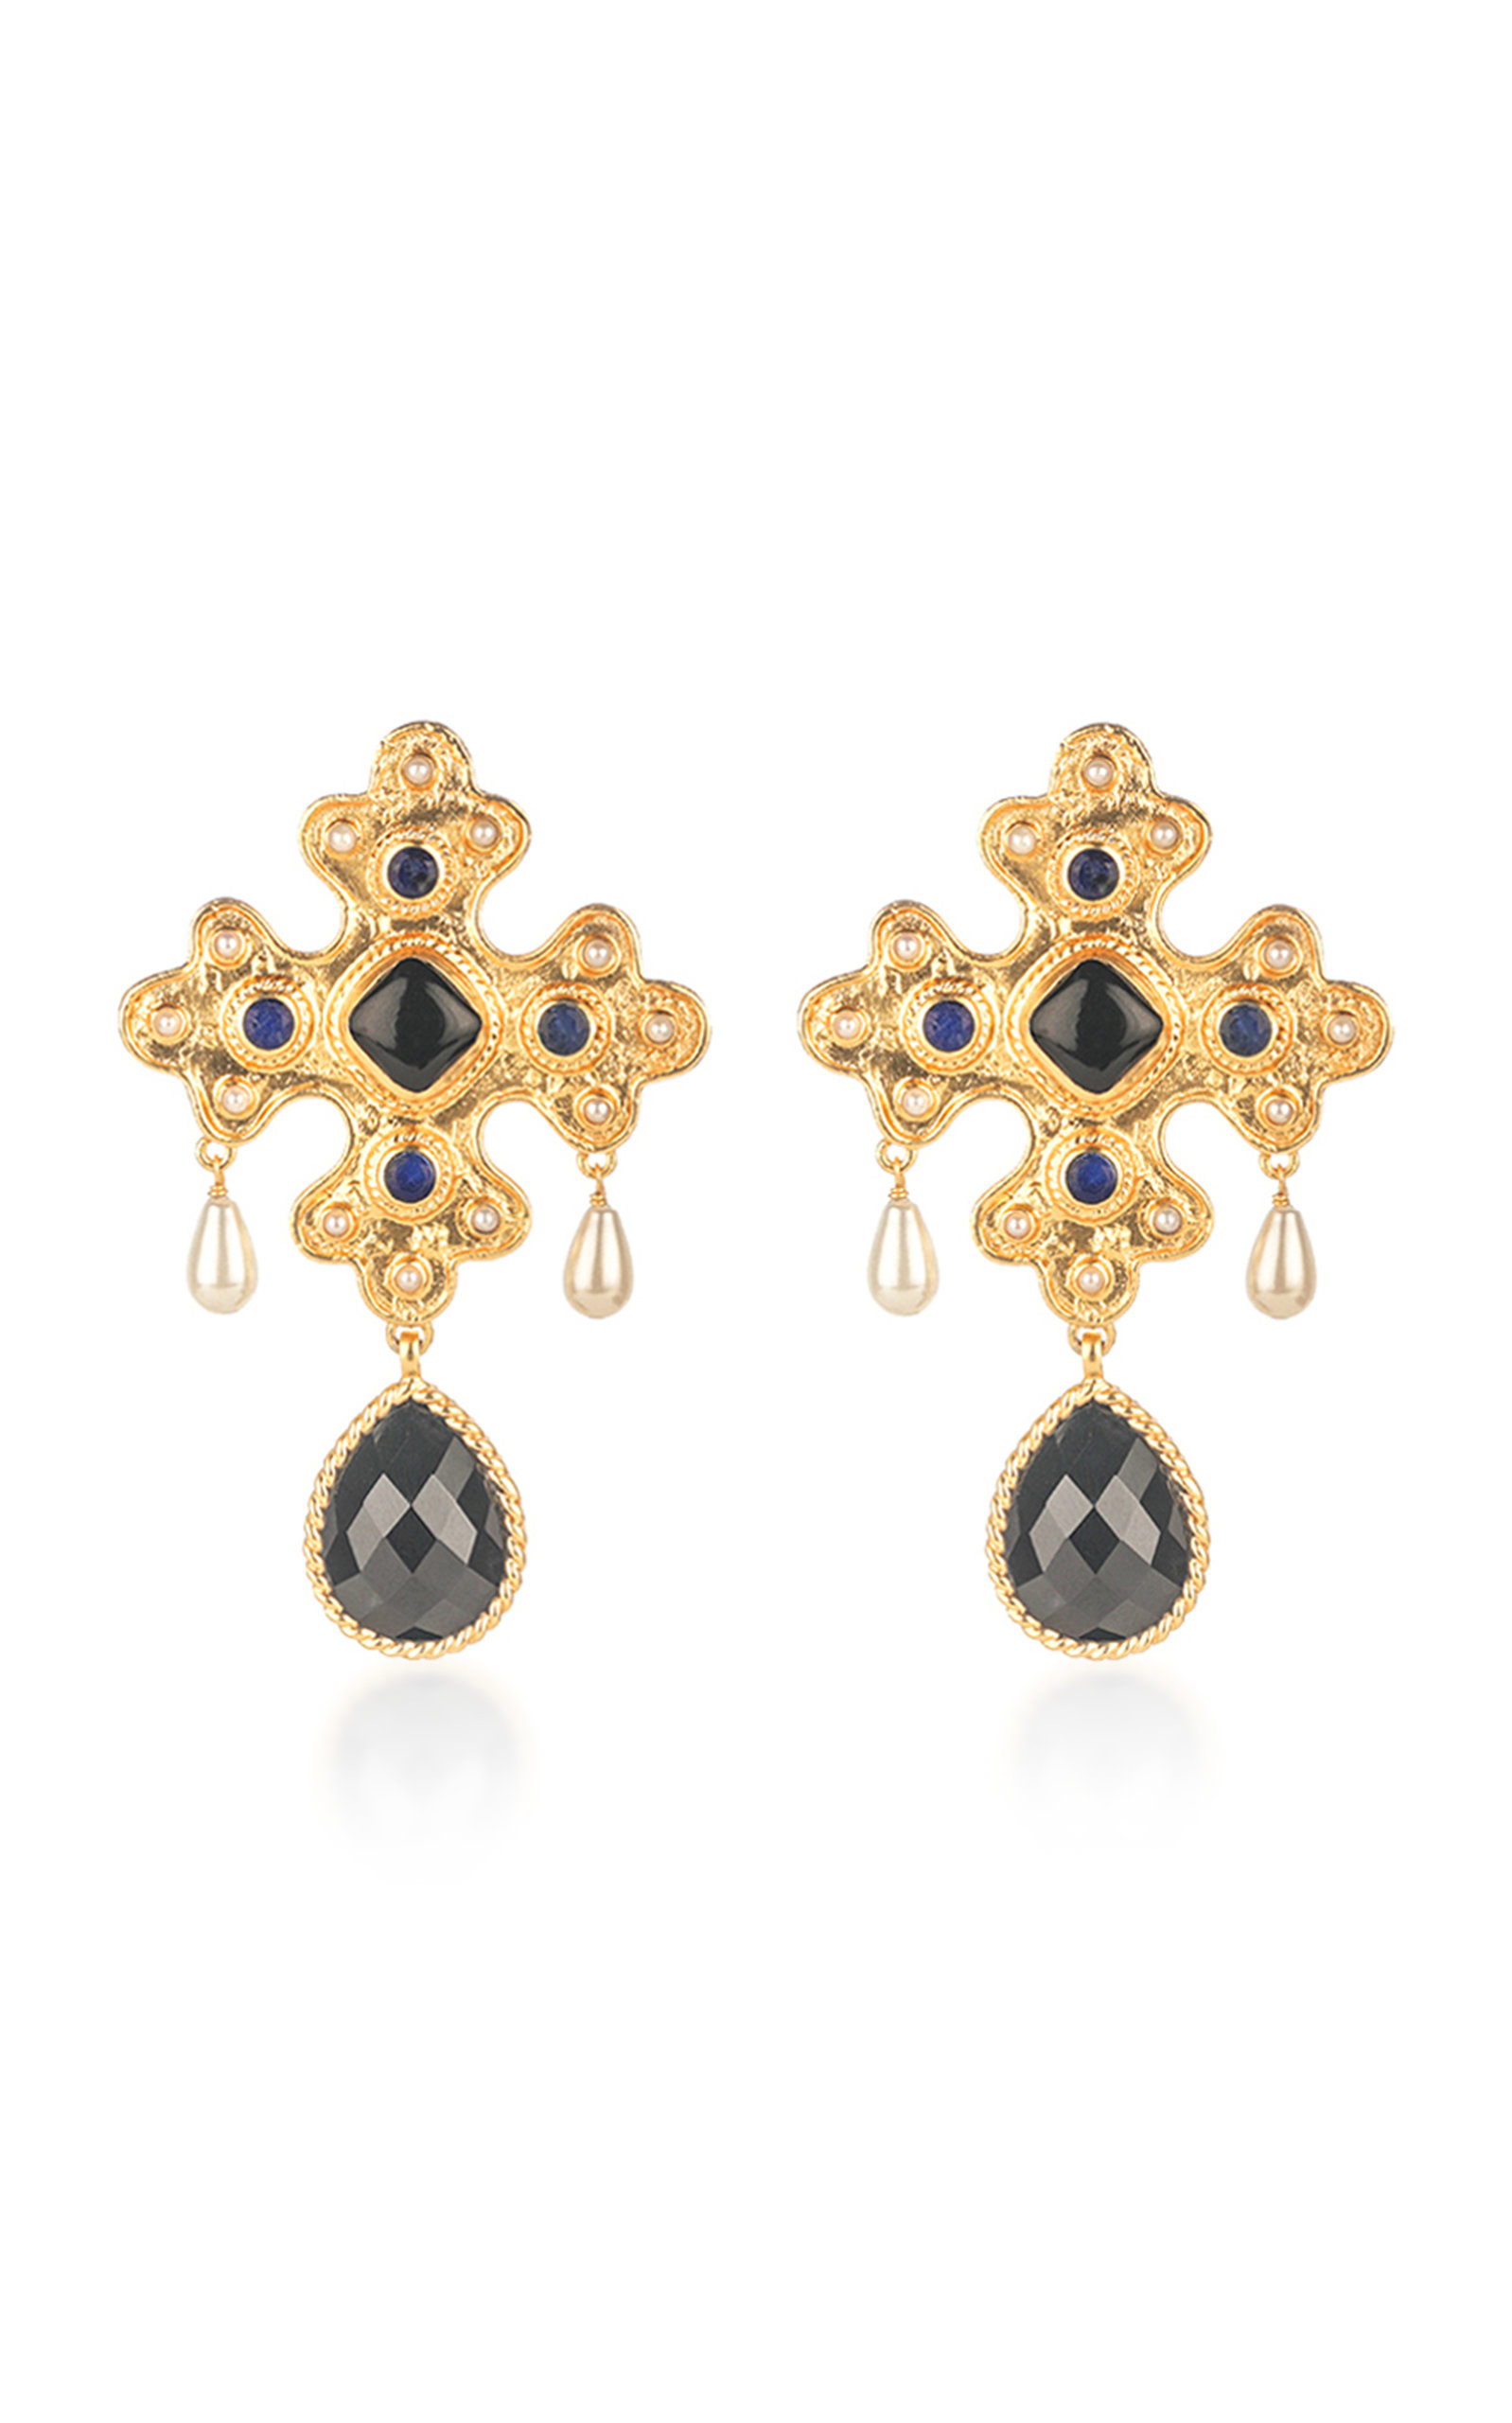 Look no further than VALÉRE for statement-making jewelry. These 'Nicolette' earrings are crafted fro